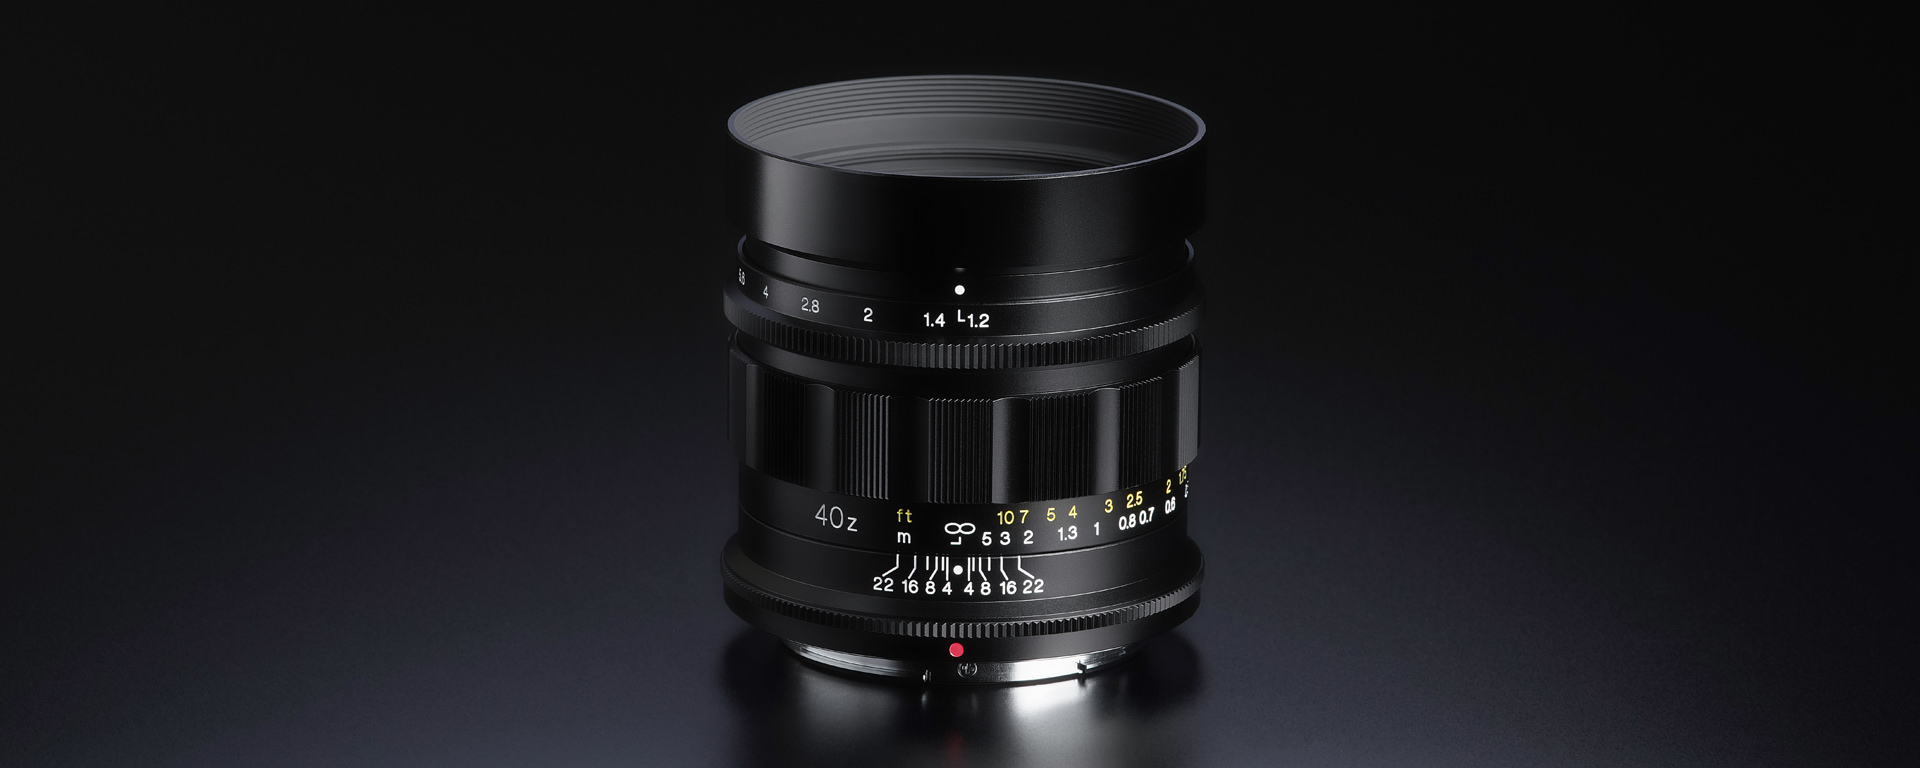 Cosina Adds Two Voigtlander Z-Mount Primes: 40mm f/1.2 and